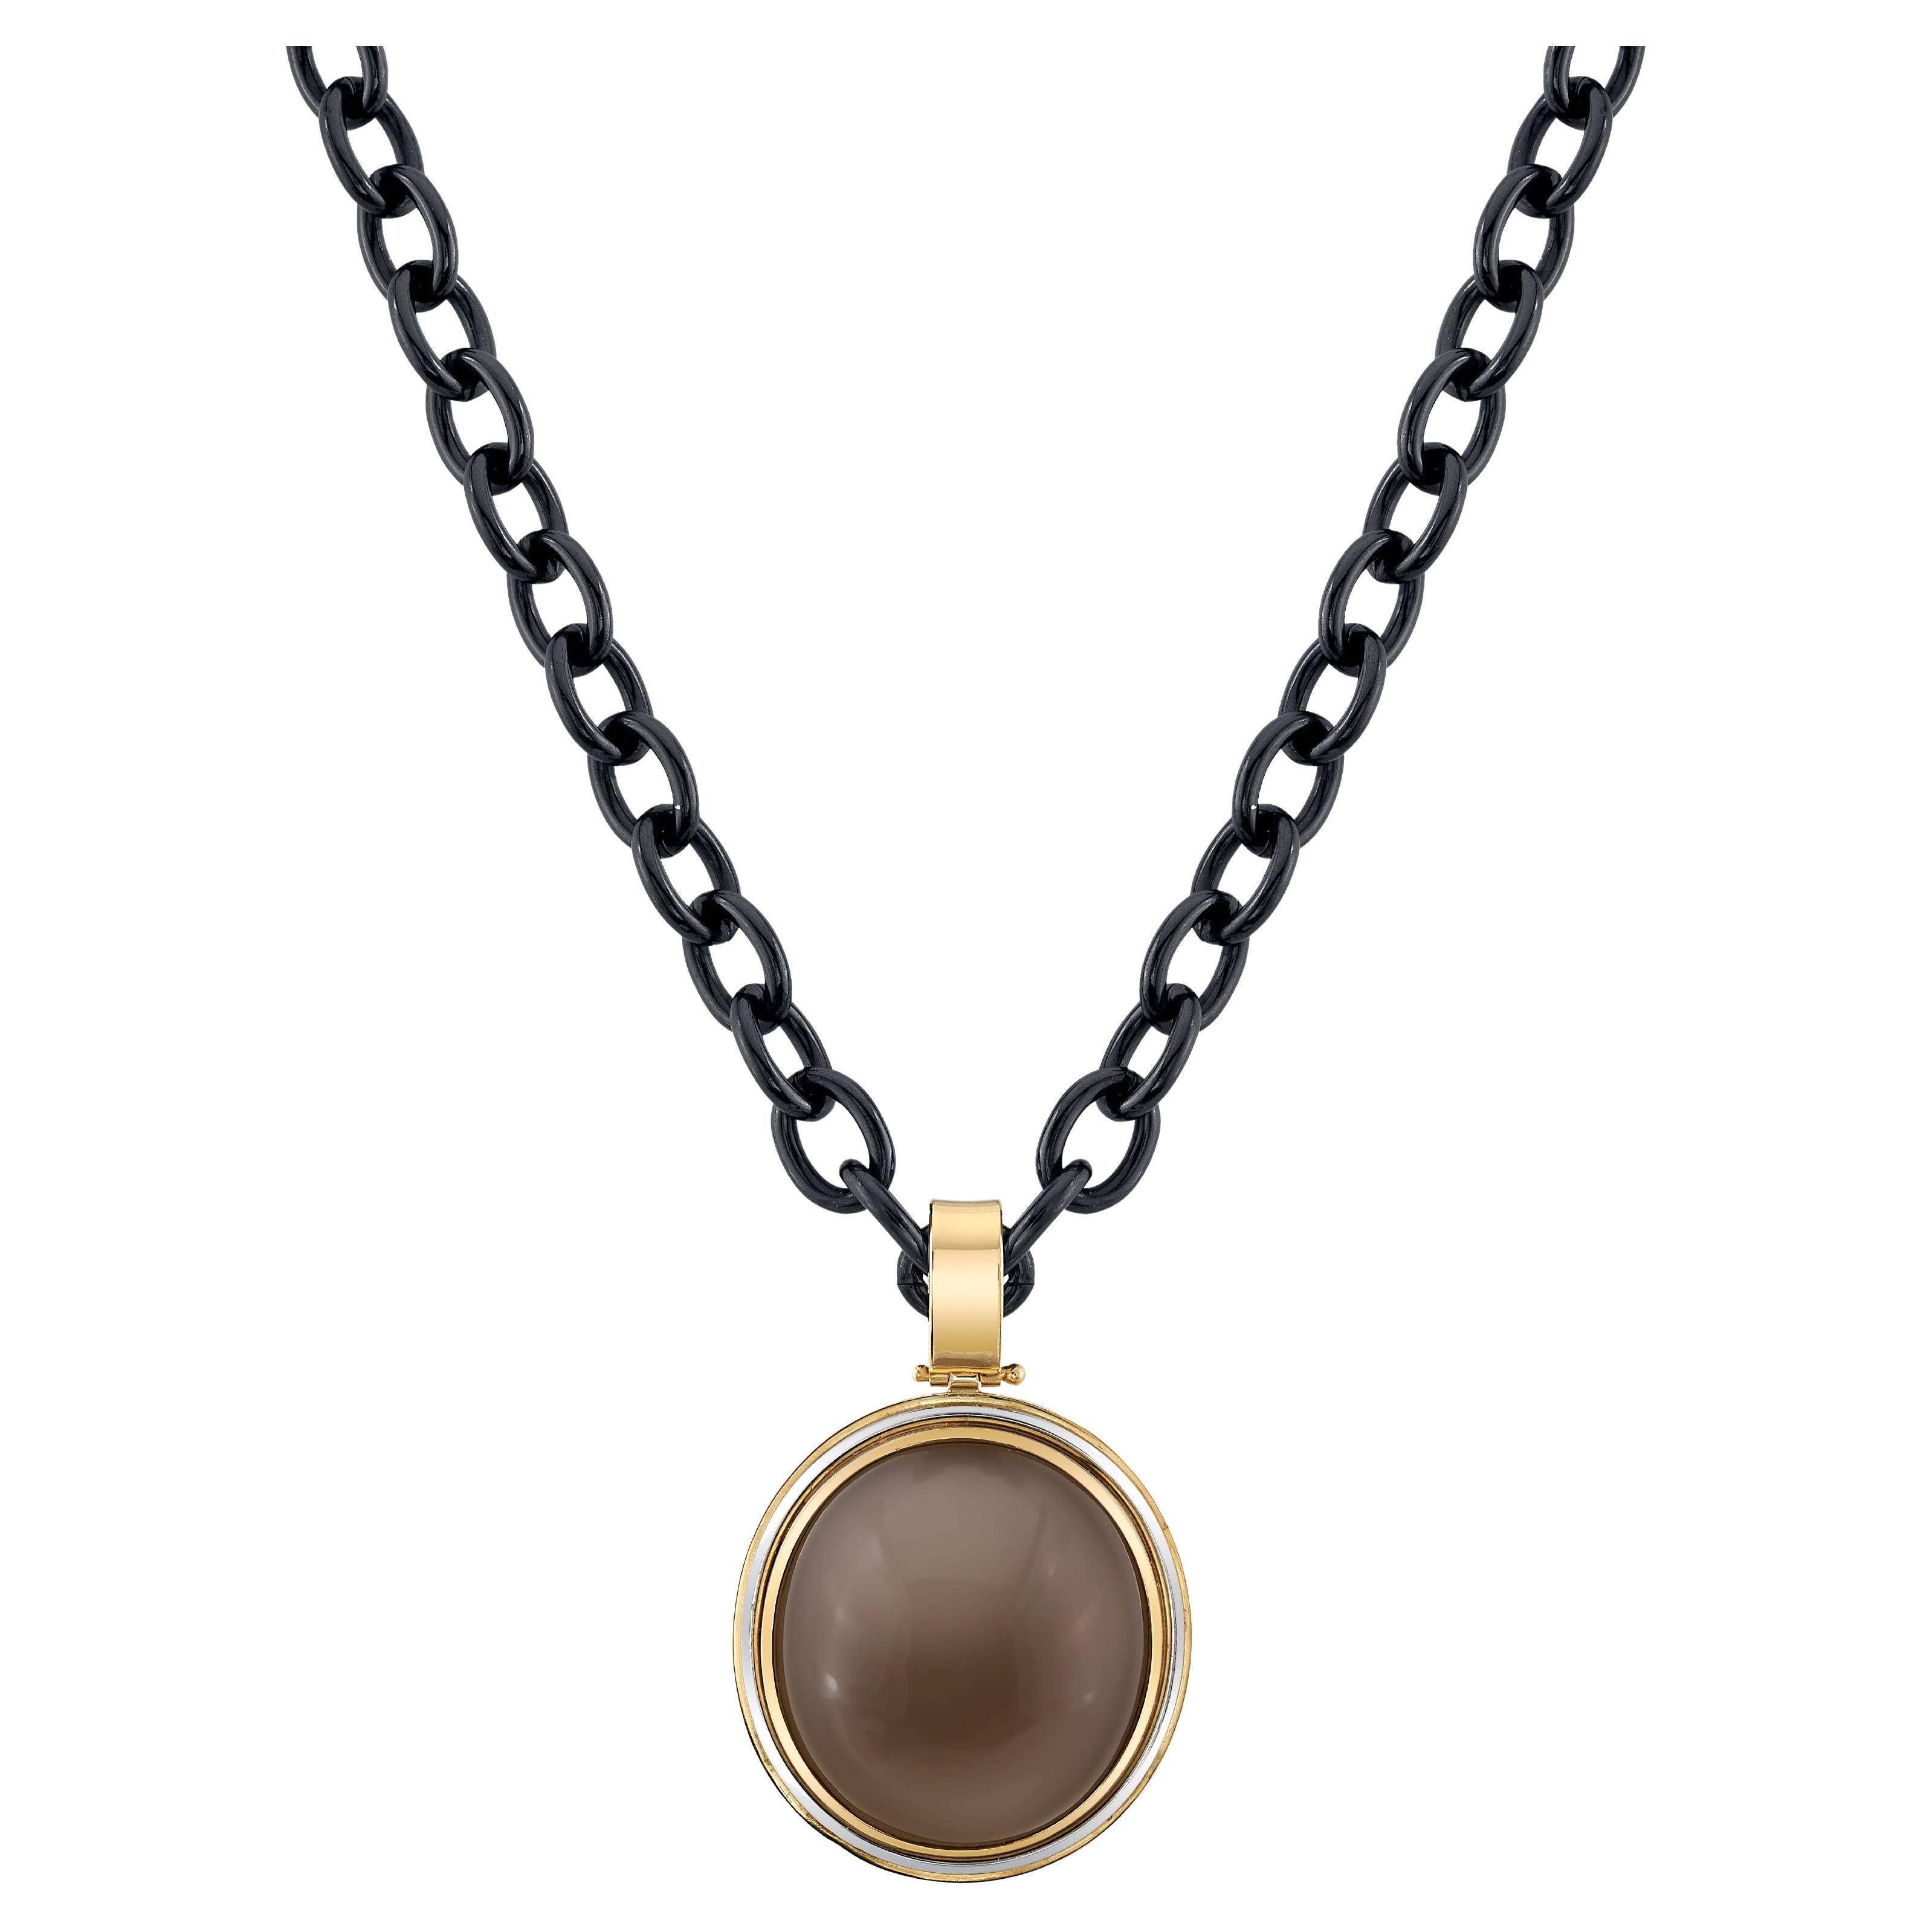 This stunning pendant features an impressive 96.50 carat taupe colored moonstone, bezel set in an 18k yellow gold pendant that was custom made for this gem. The moonstone has a gorgeous soft, grayish taupe color that is very neutral and